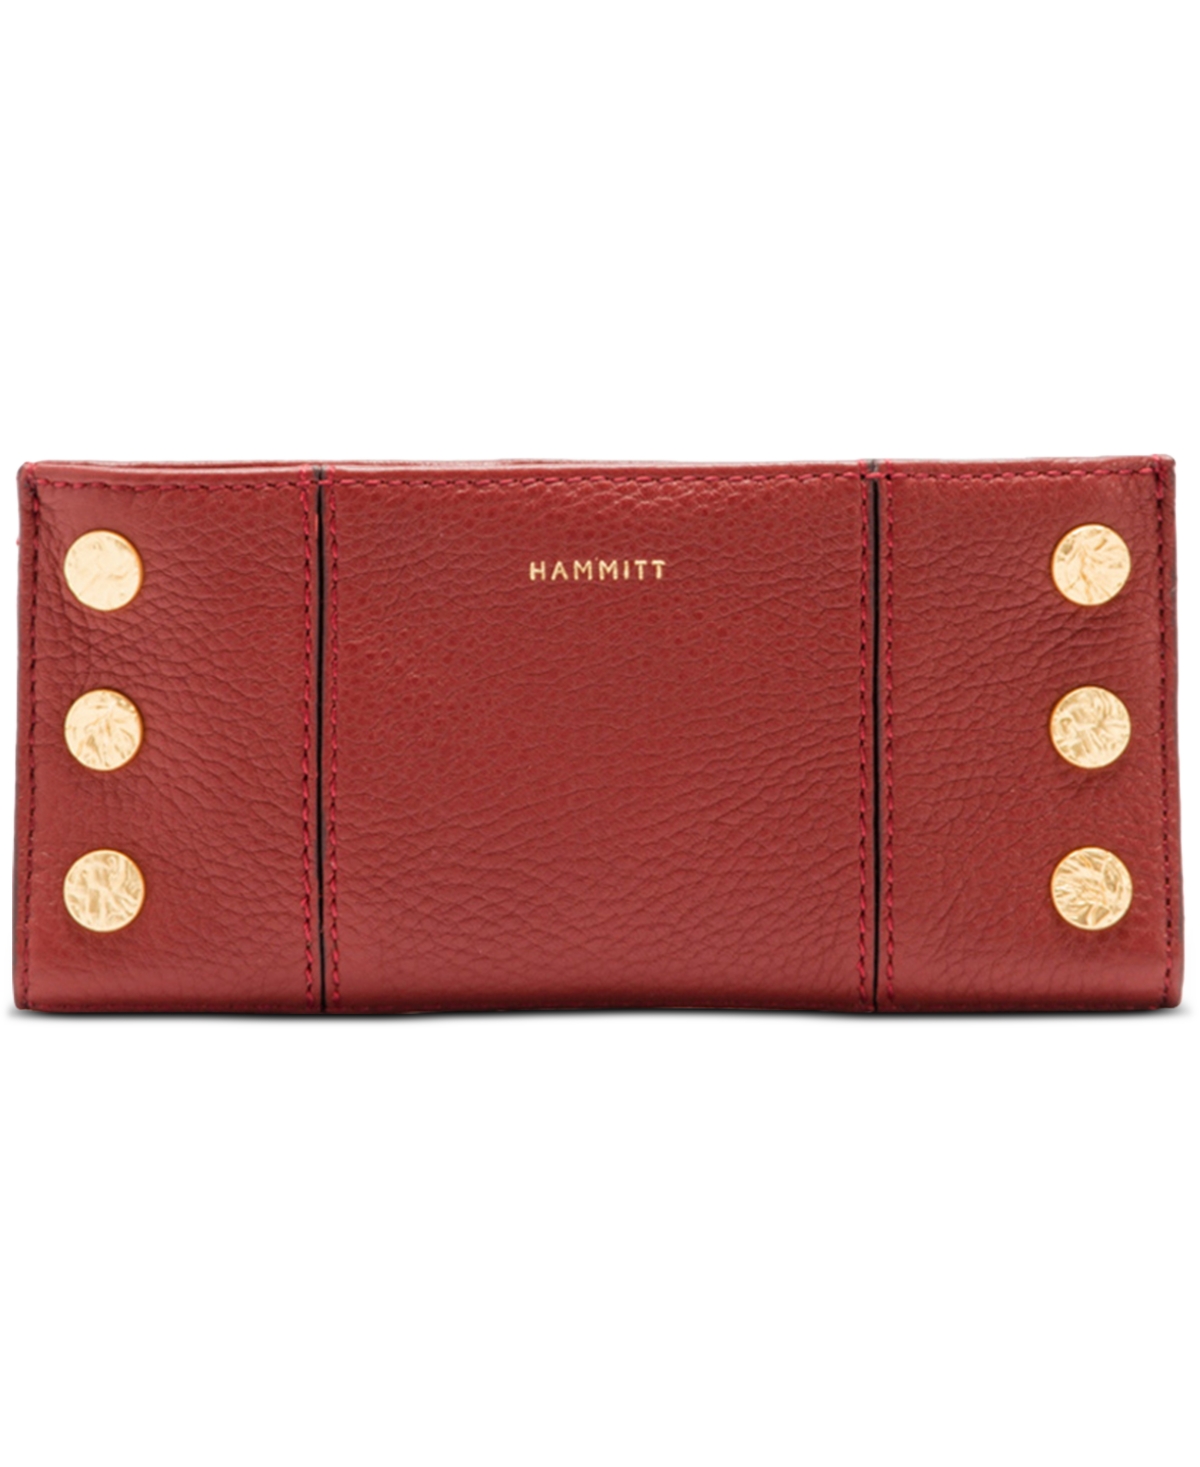 110 North Leather Wallet - Bungalow B